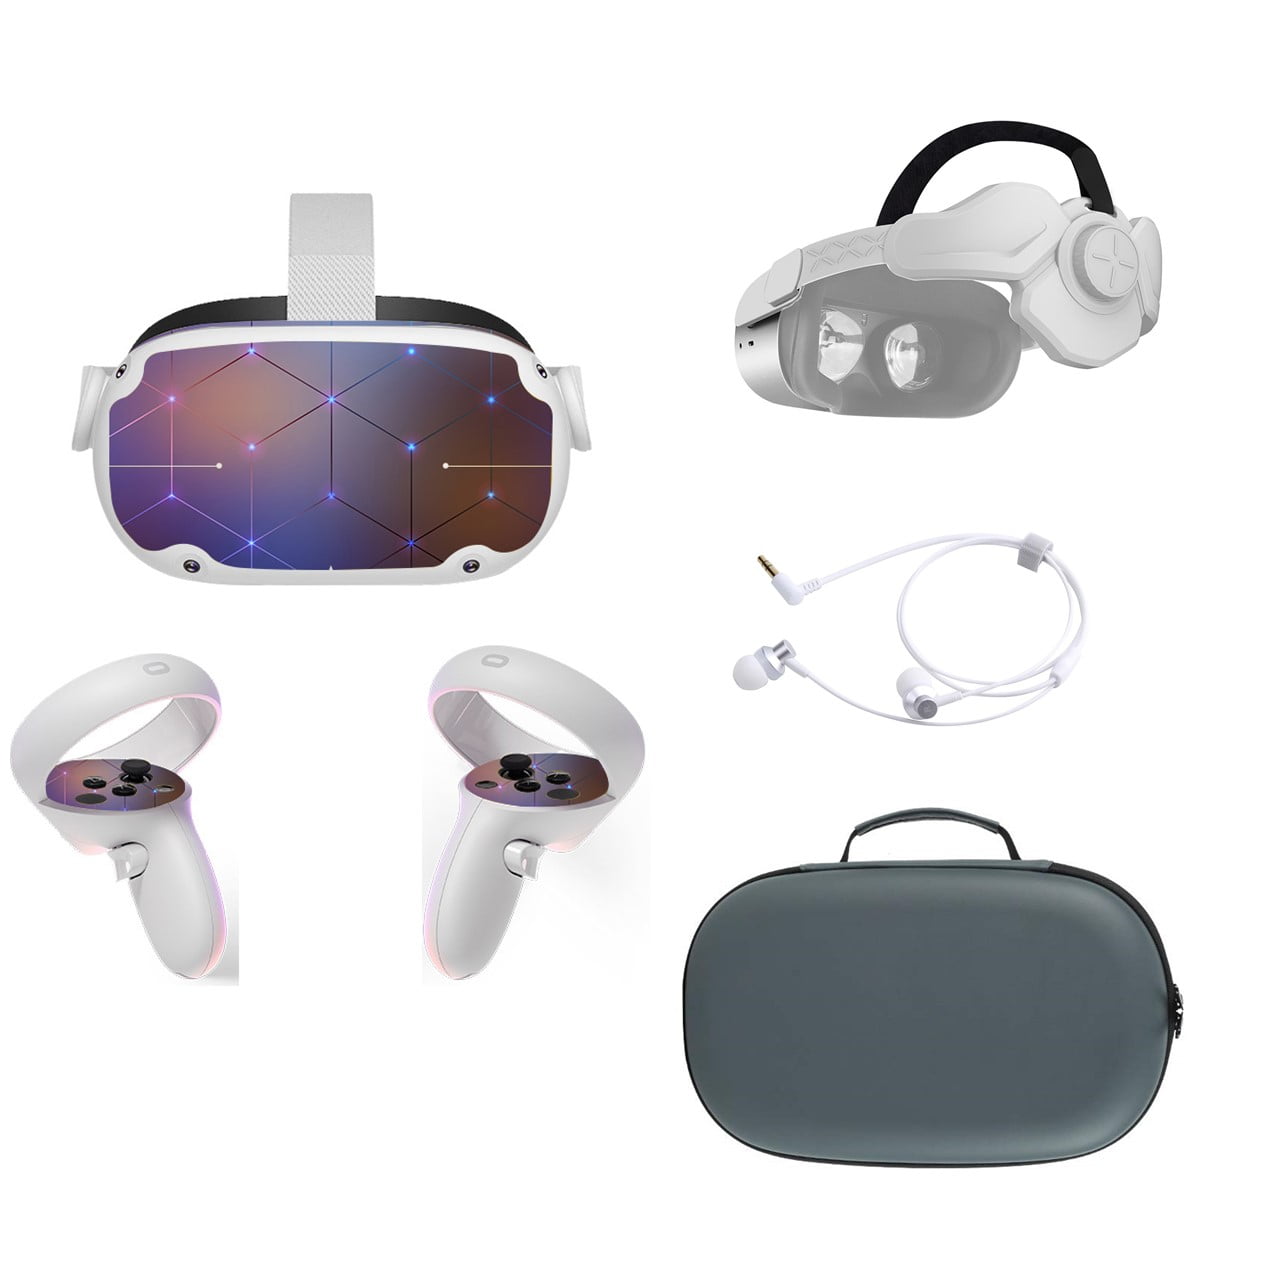 thesaurus punishment Specially 2022 Oculus Quest 2 All-In-One VR Headset, Touch Controllers, 256GB SSD,  1832x1920 up to 90 Hz Refresh Rate LCD, 3D Audio, Mytrix Head Strap,  Carrying Case, Earphone, Futuristic Space Purple Stickers -